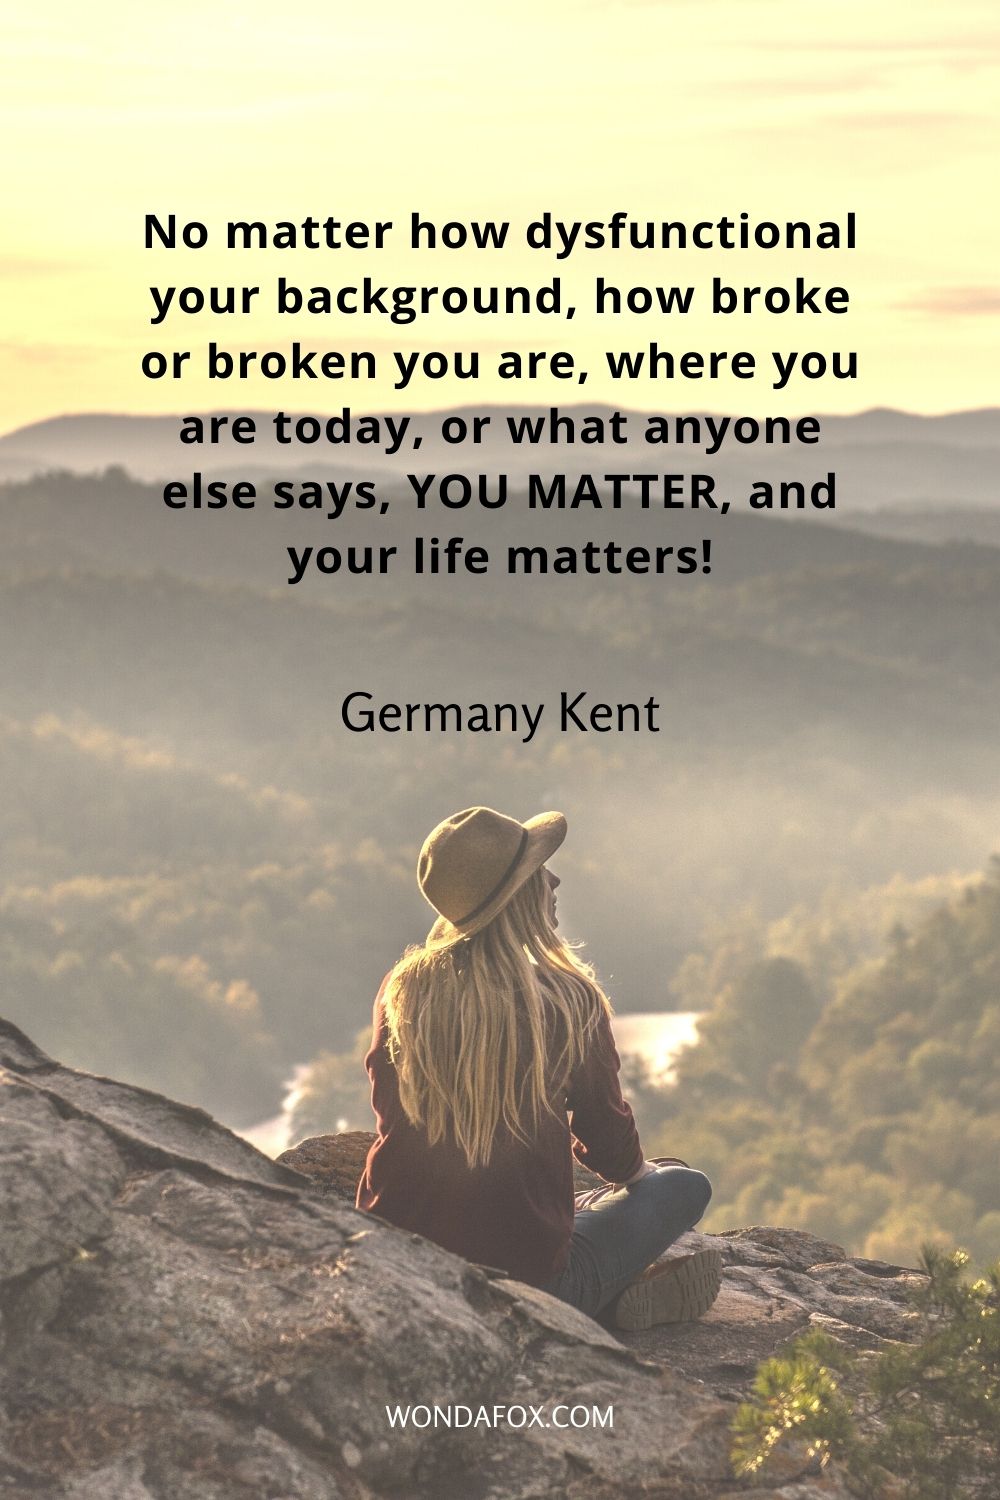 No matter how dysfunctional your background, how broke or broken you are, where you are today, or what anyone else says, YOU MATTER, and your life matters!